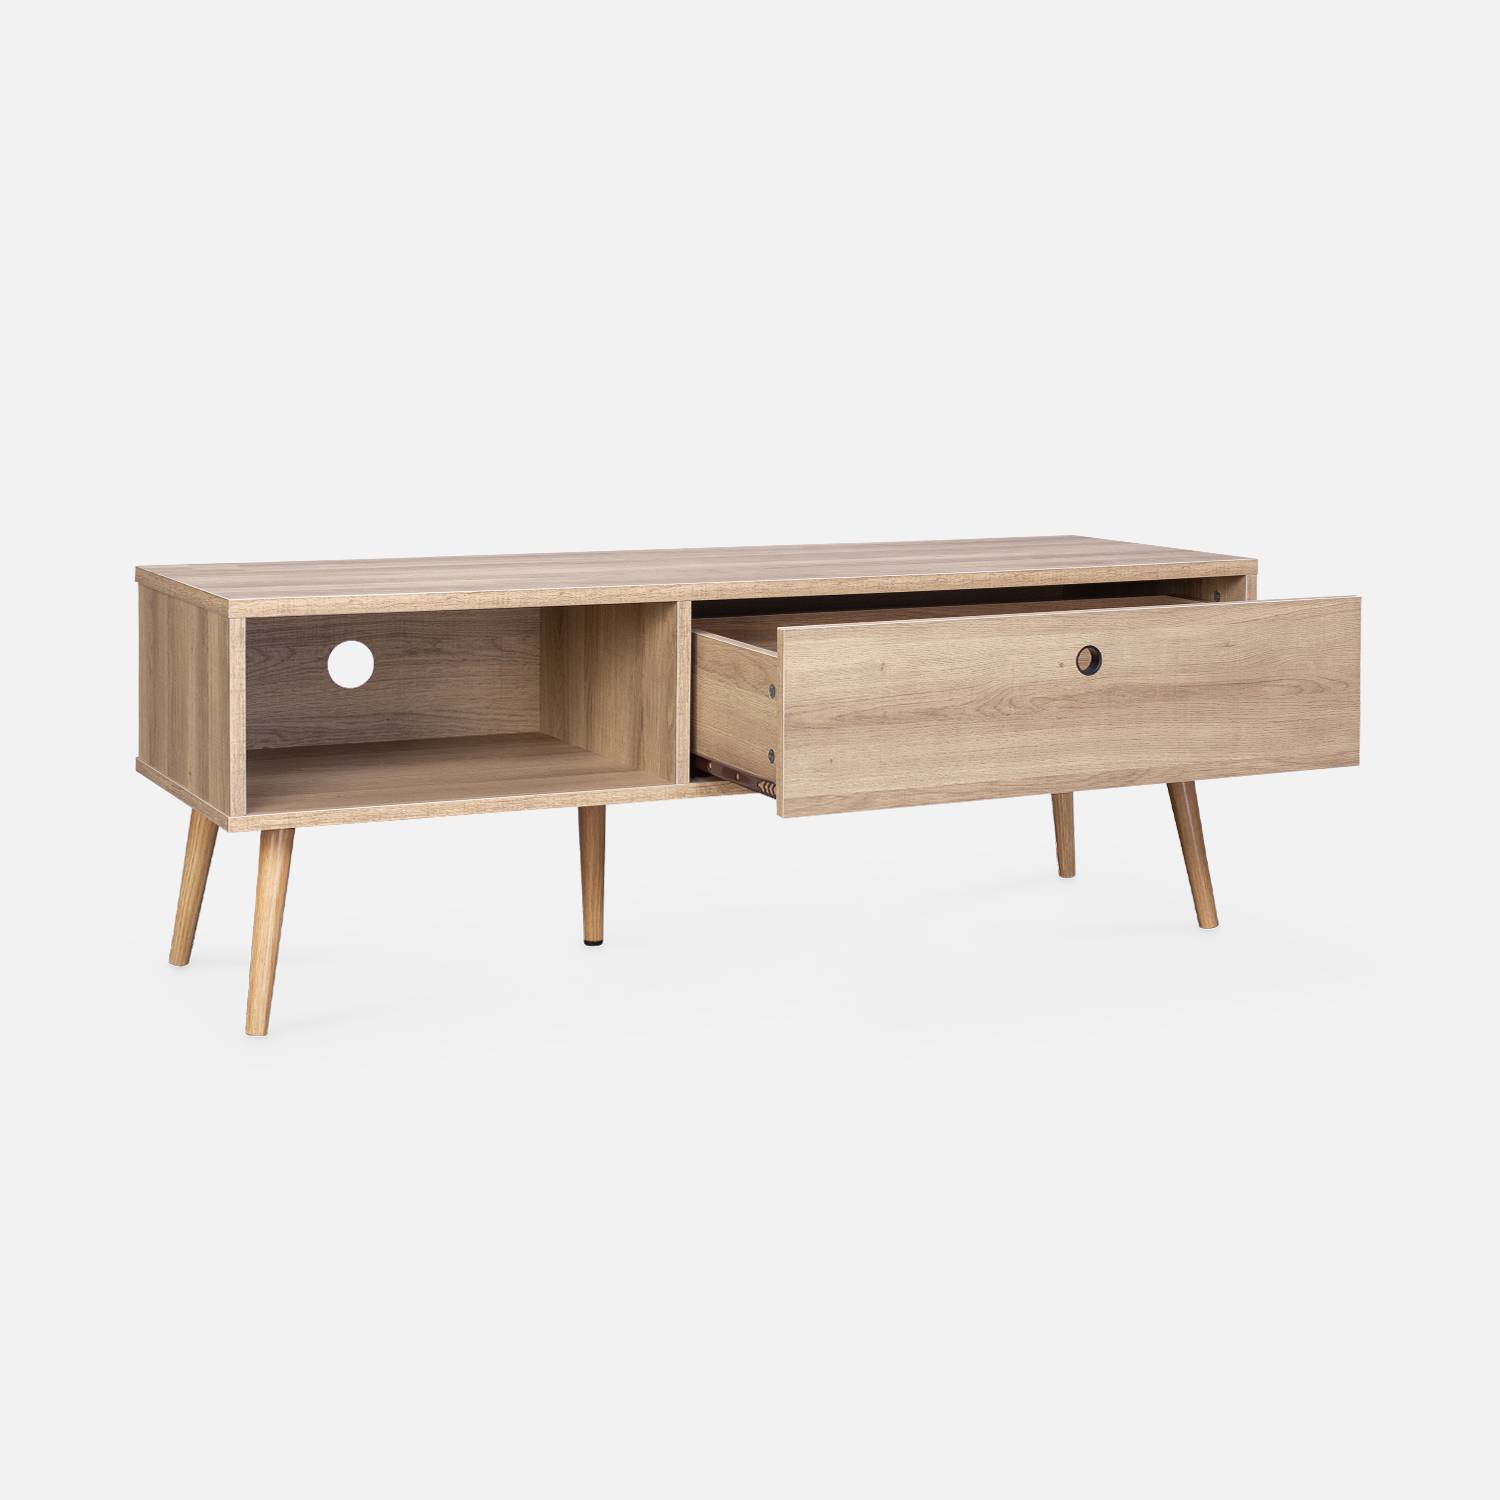 Scandinavian-style wood-effect TV stand with two storage spaces, 120x39x43cm - Scandi - Natural,sweeek,Photo5